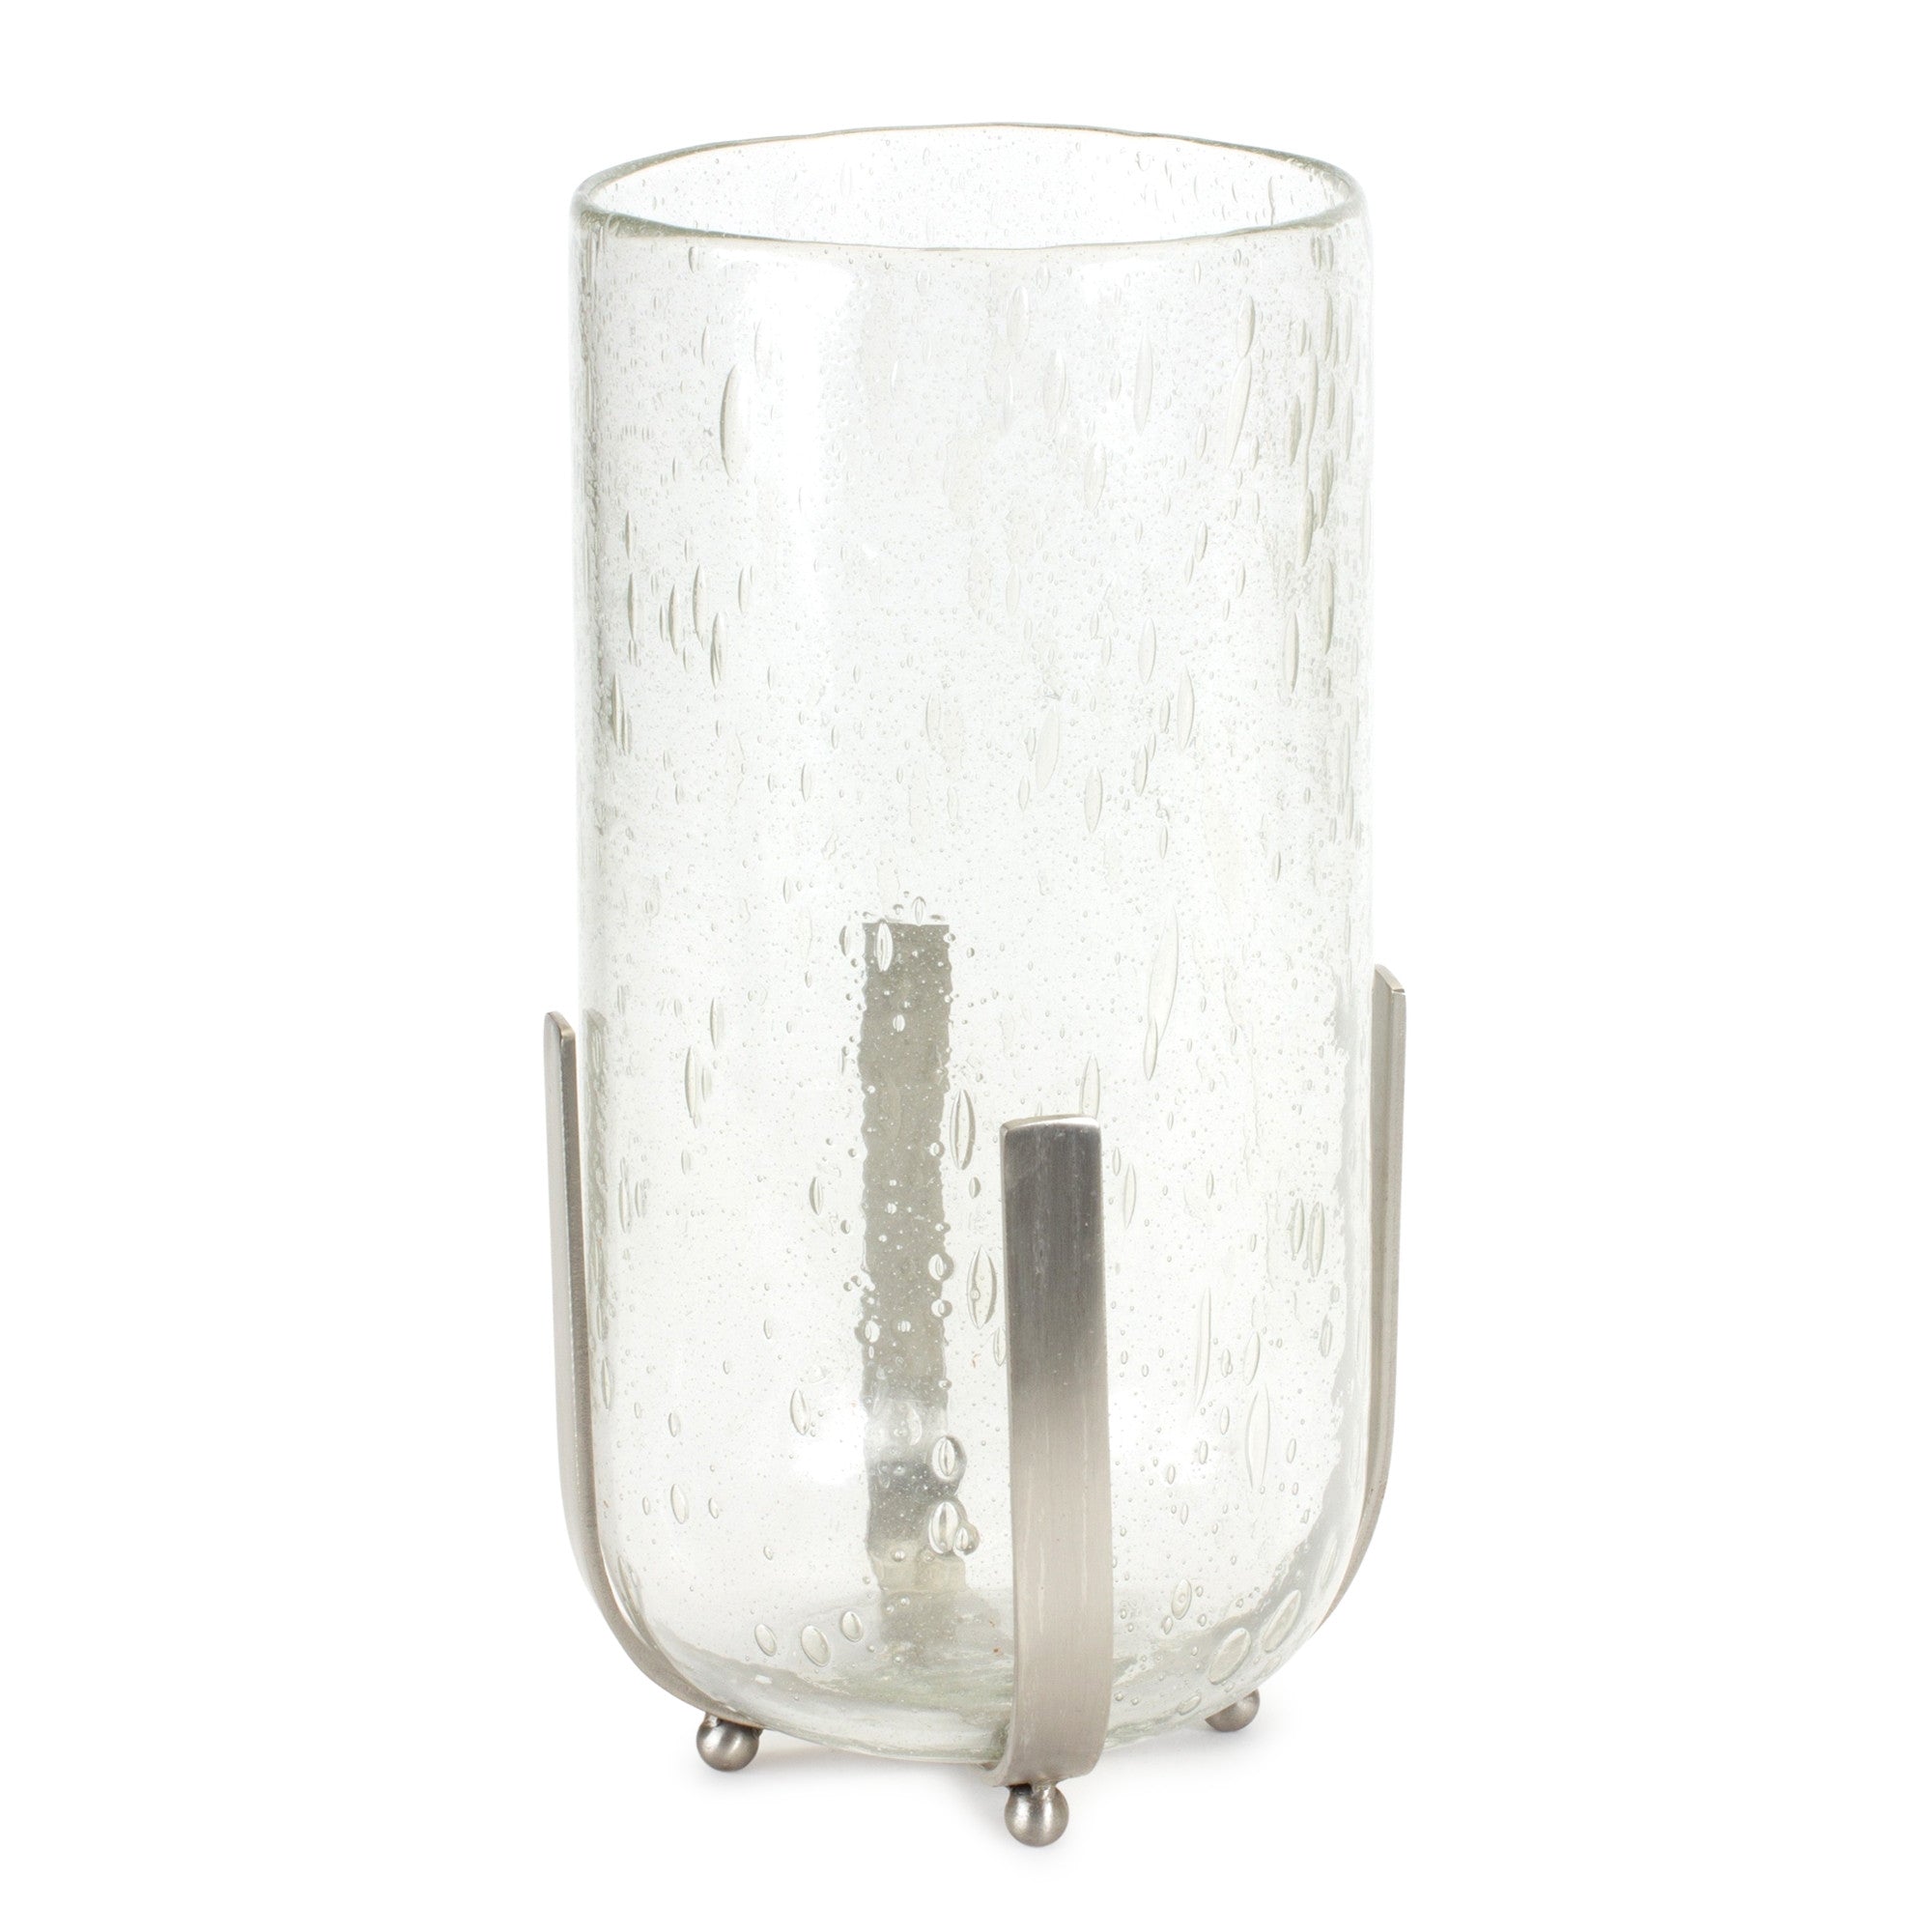 6" Silver Flameless Tabletop Hurricane Candle Holder - Tuesday Morning-Candle Holders